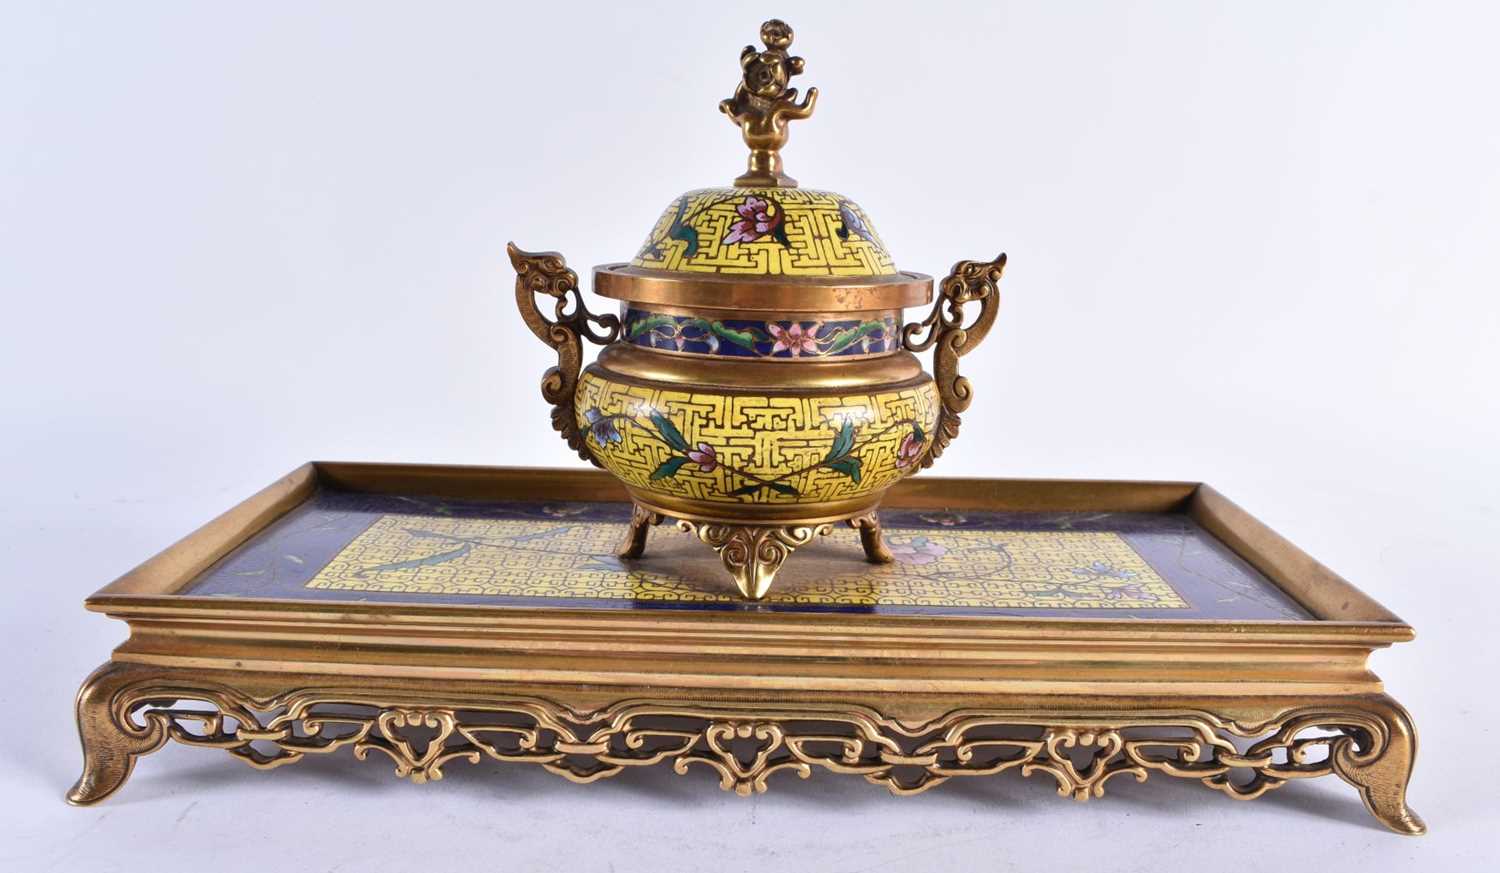 A FINE 19TH CENTURY FRENCH BRONZE AND CHAMPLEVE ENAMEL DESK GARNITURE in the manner of - Image 2 of 14